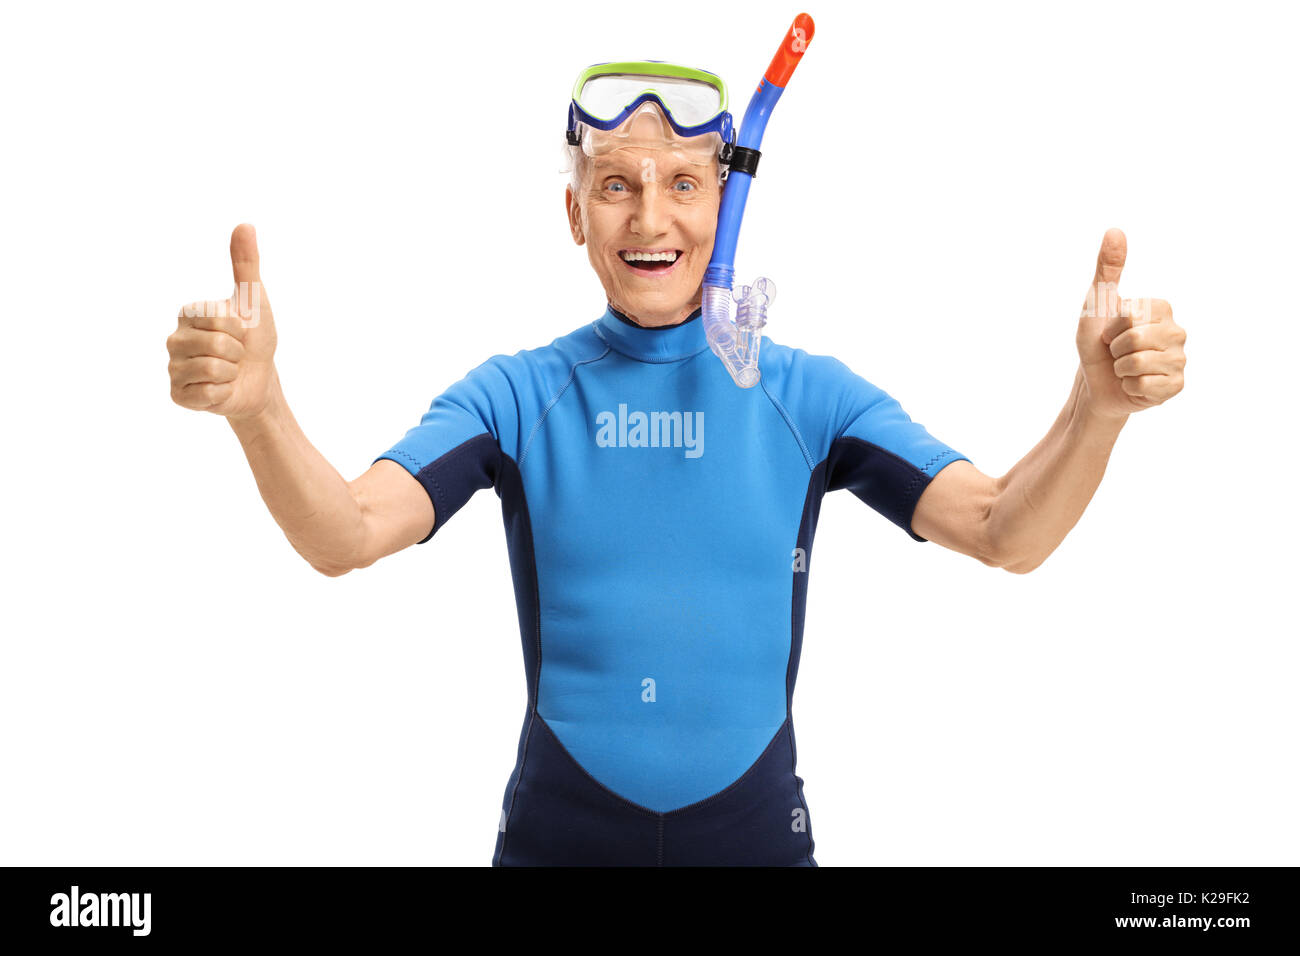 Cheerful senior with snorkeling equipment wearing a wetsuit and making thumbs up sign isolated on white background Stock Photo